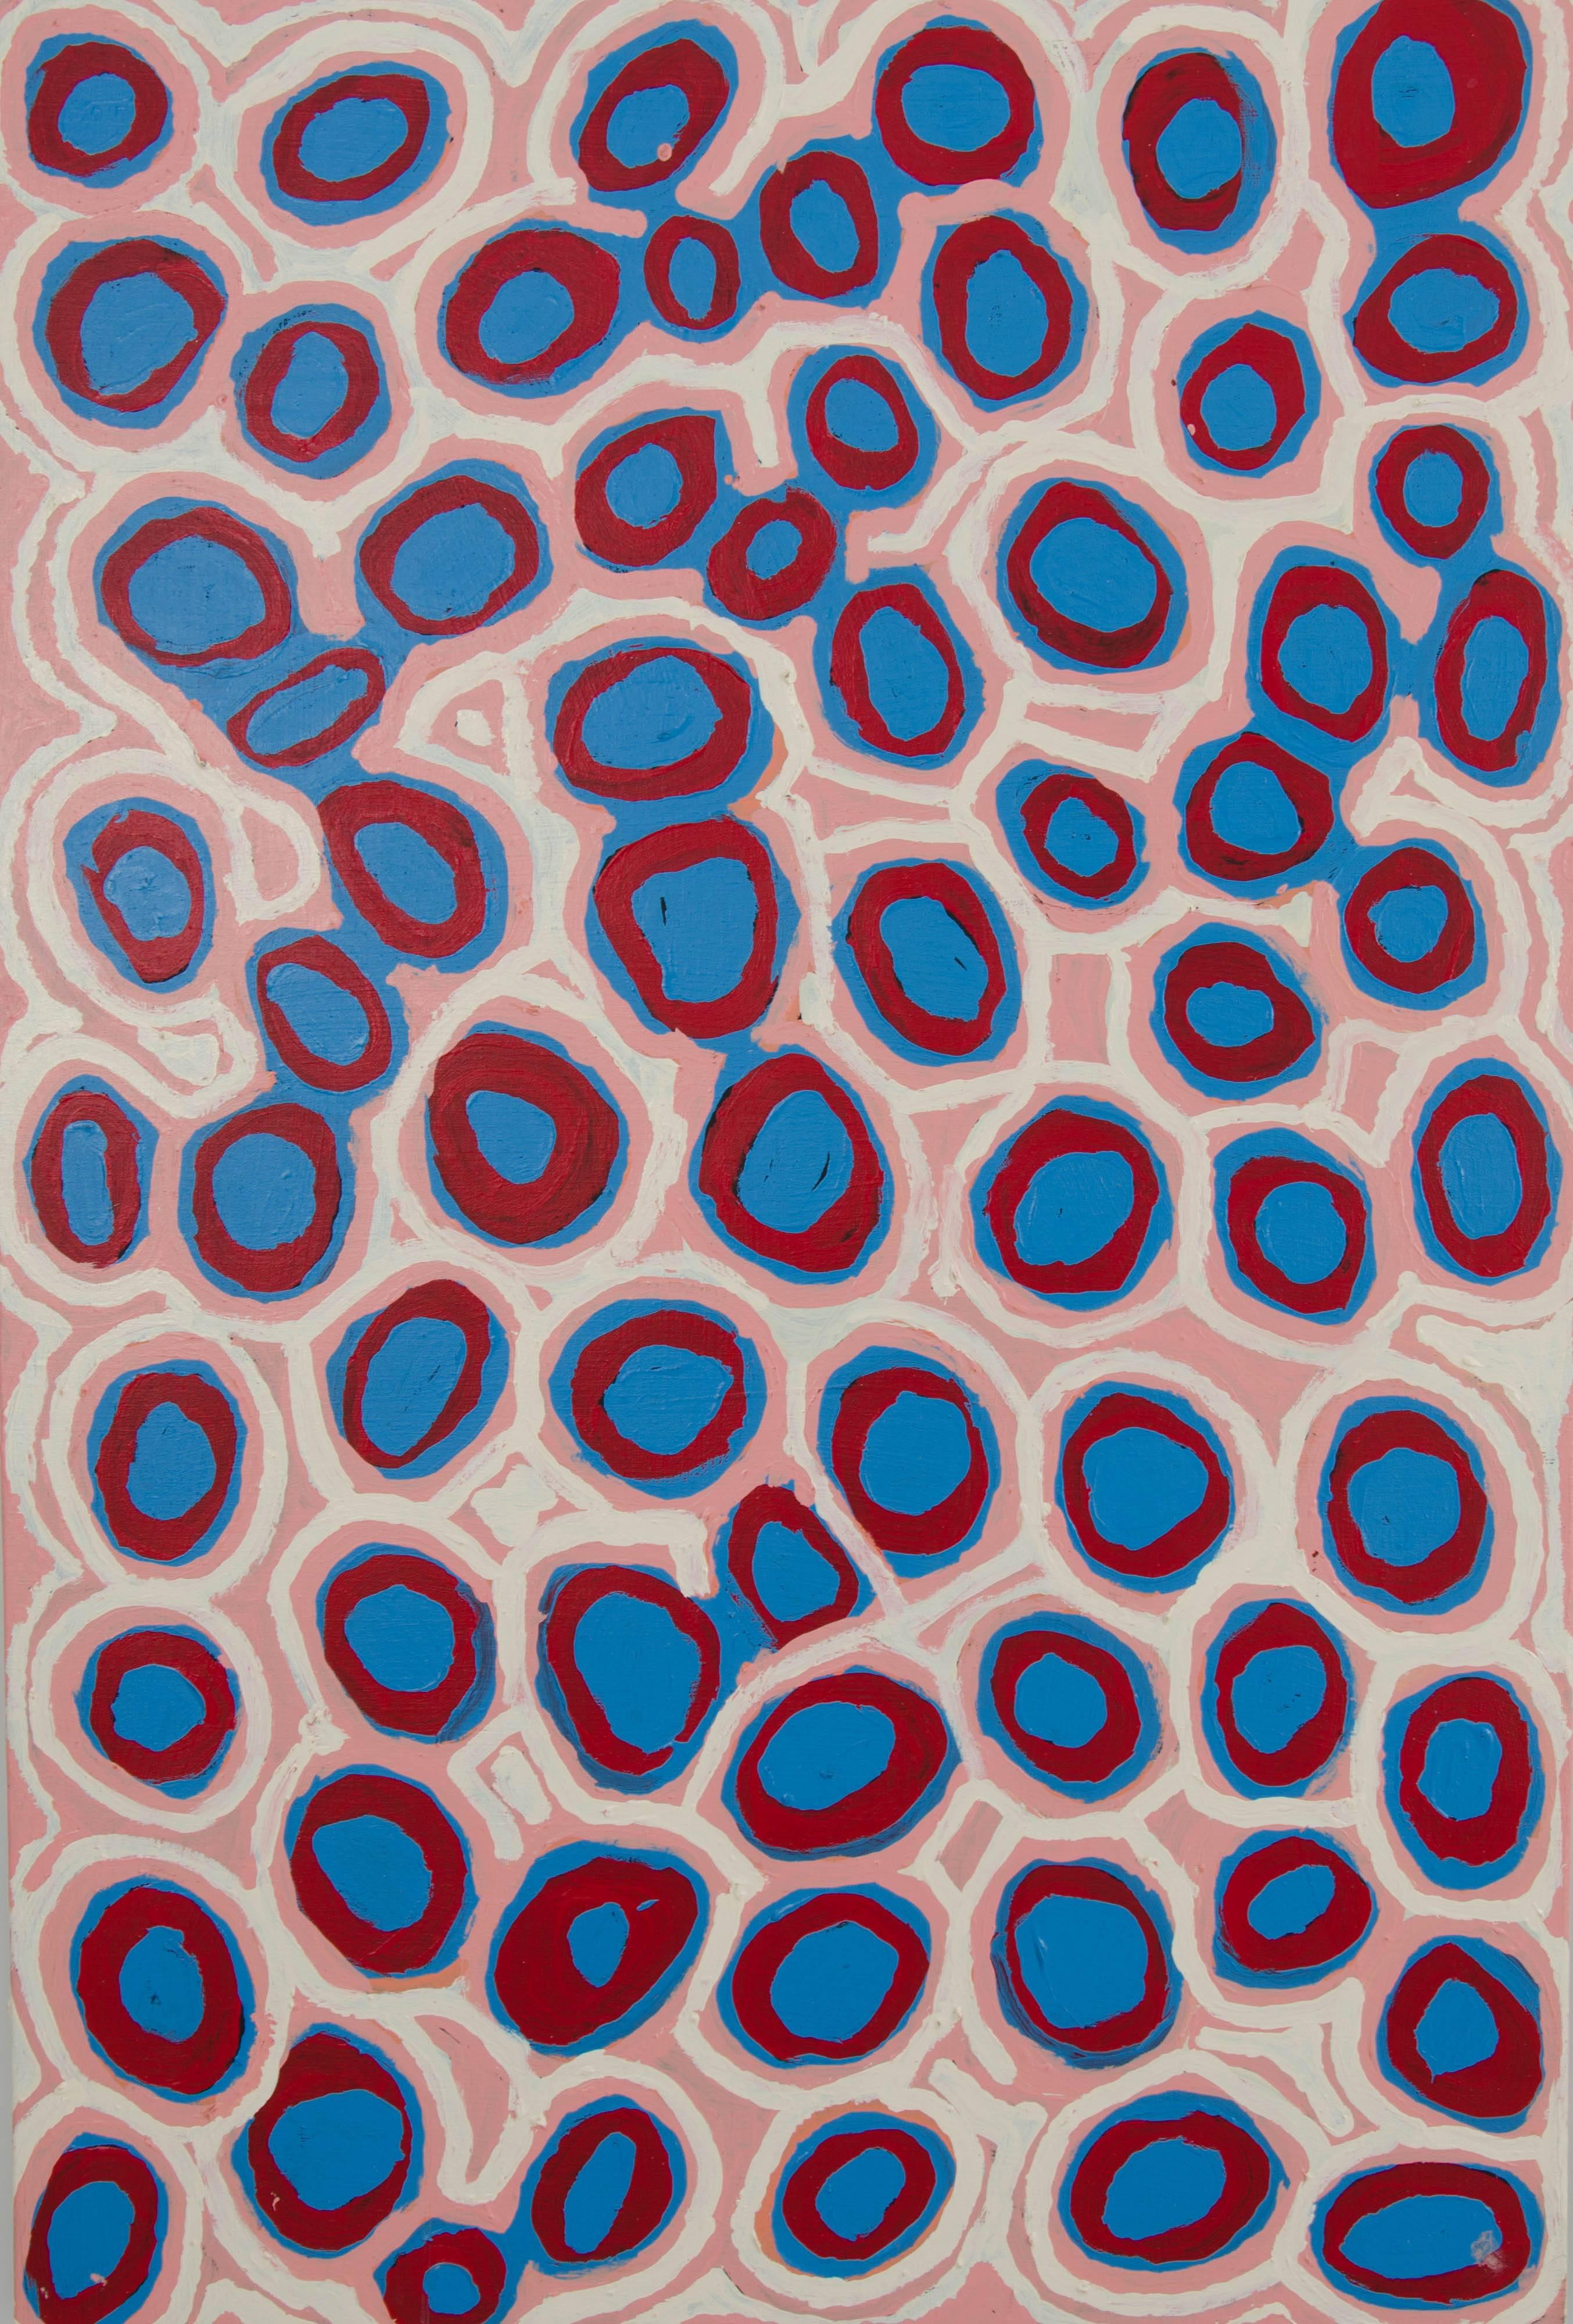 'Takupalangu' by Alice Nampitjinpa

This wonderful acrylic painting, with lively, circular designs in red against a pink and blue background, was made in 2014 by Australian Aboriginal artist Alice Nampitjinpa.

The painting shows an abstract